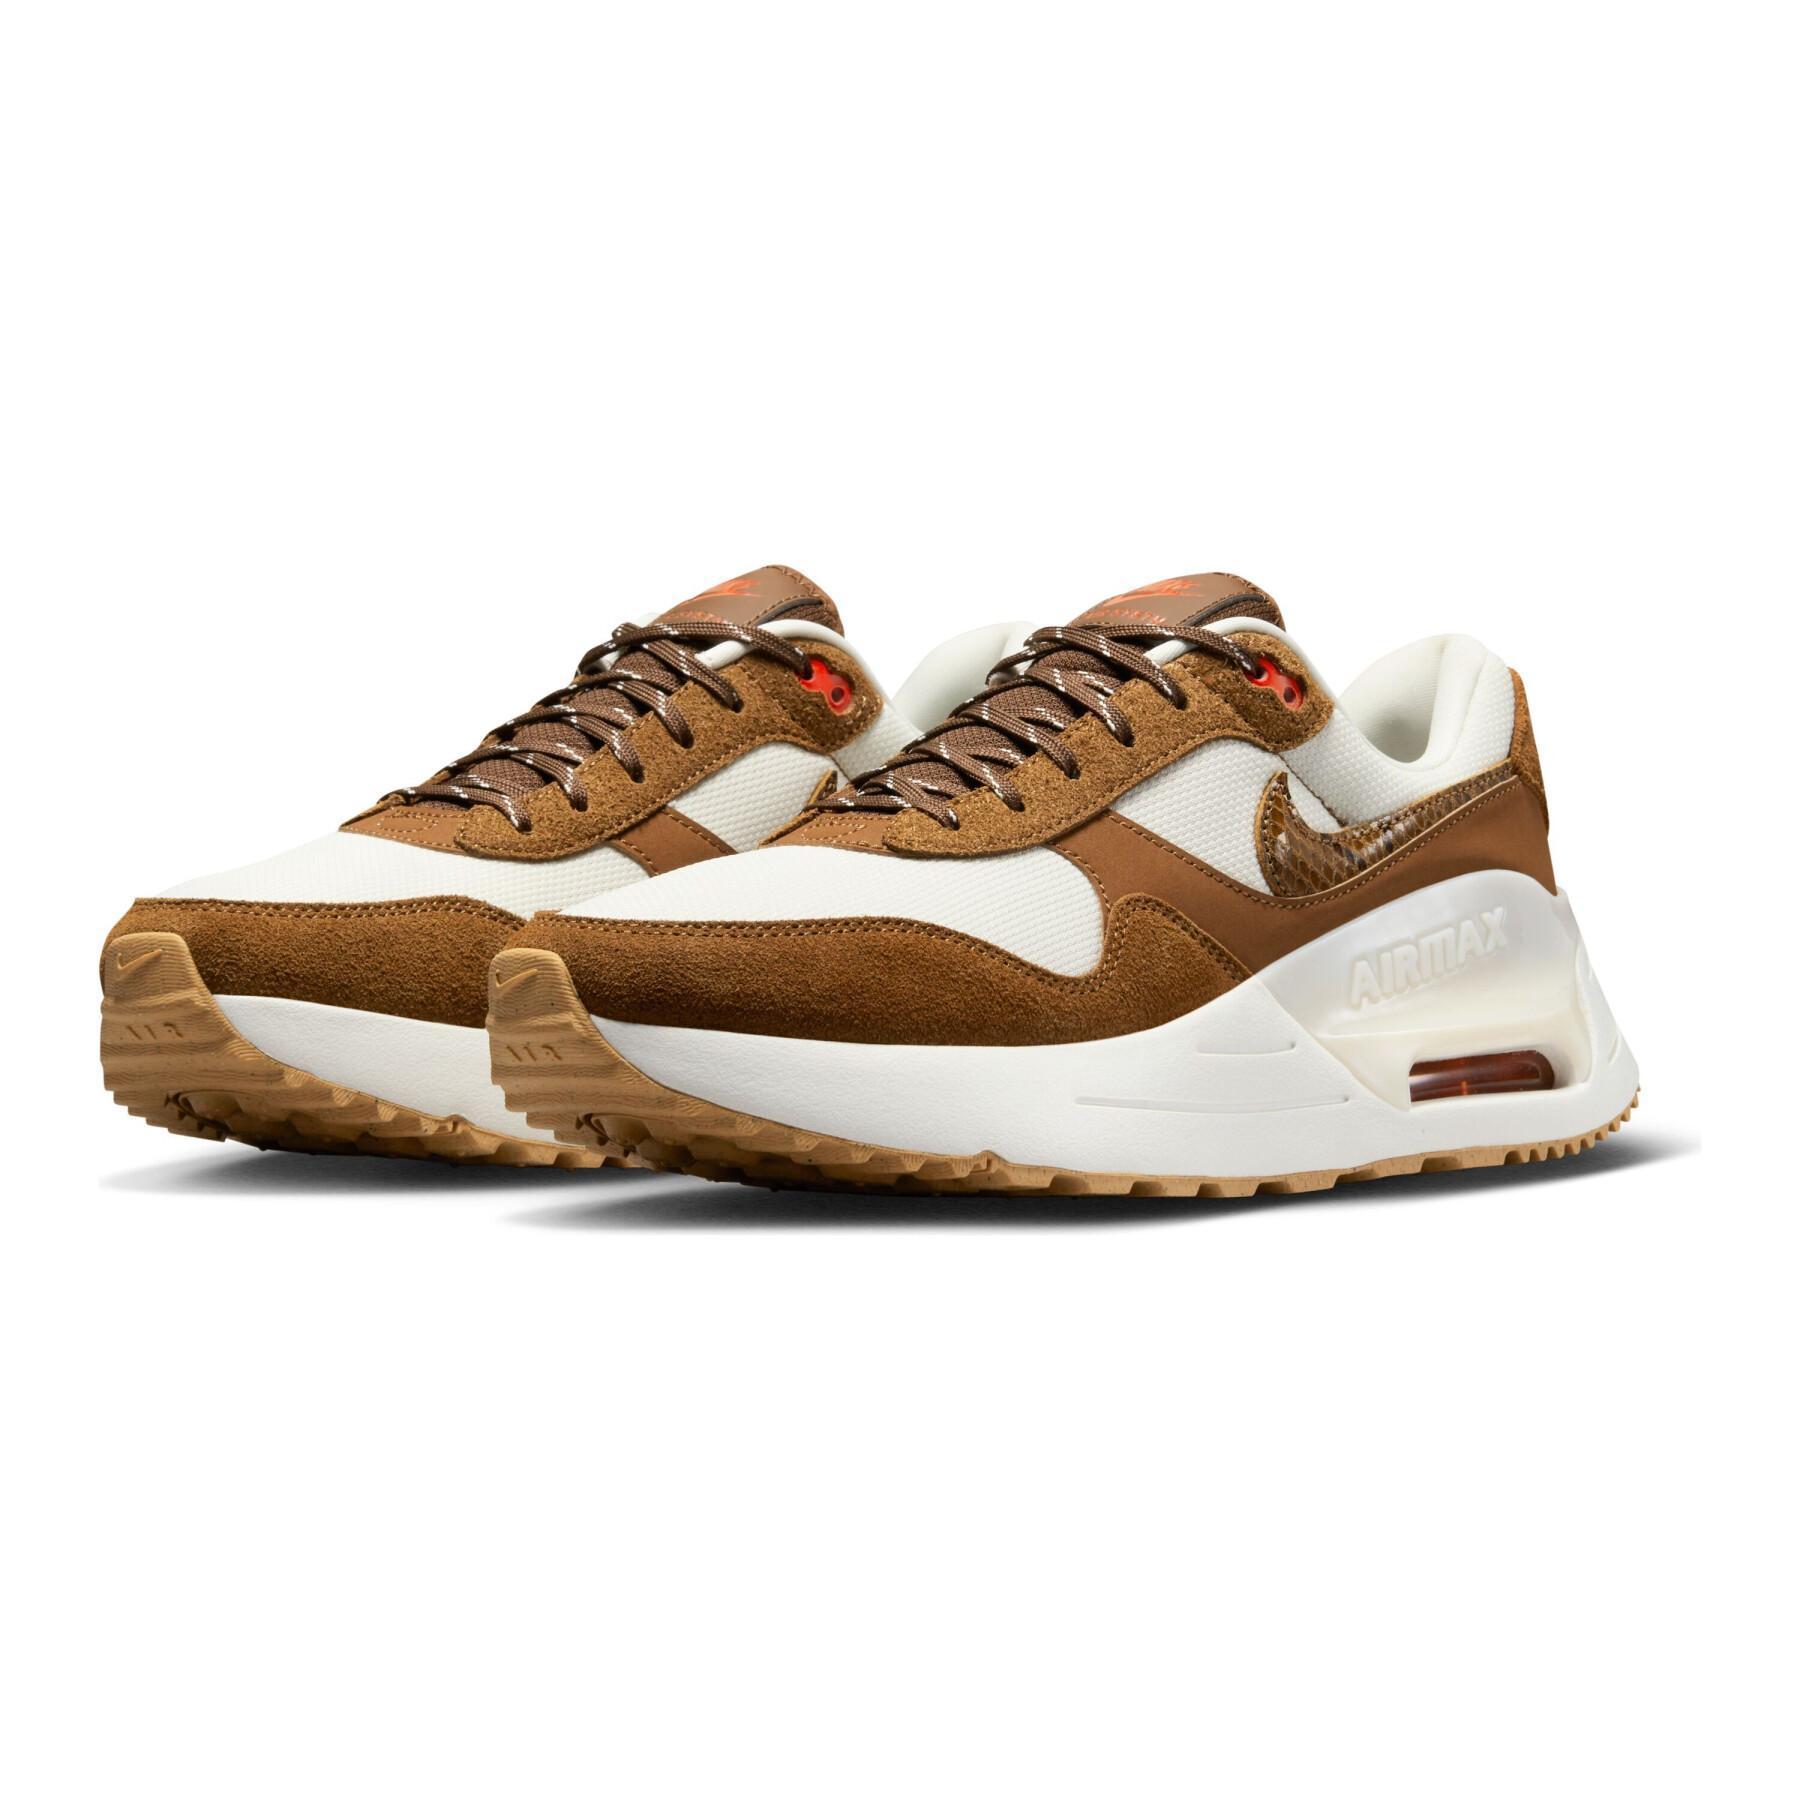 Damestrainers Nike Air max systm se